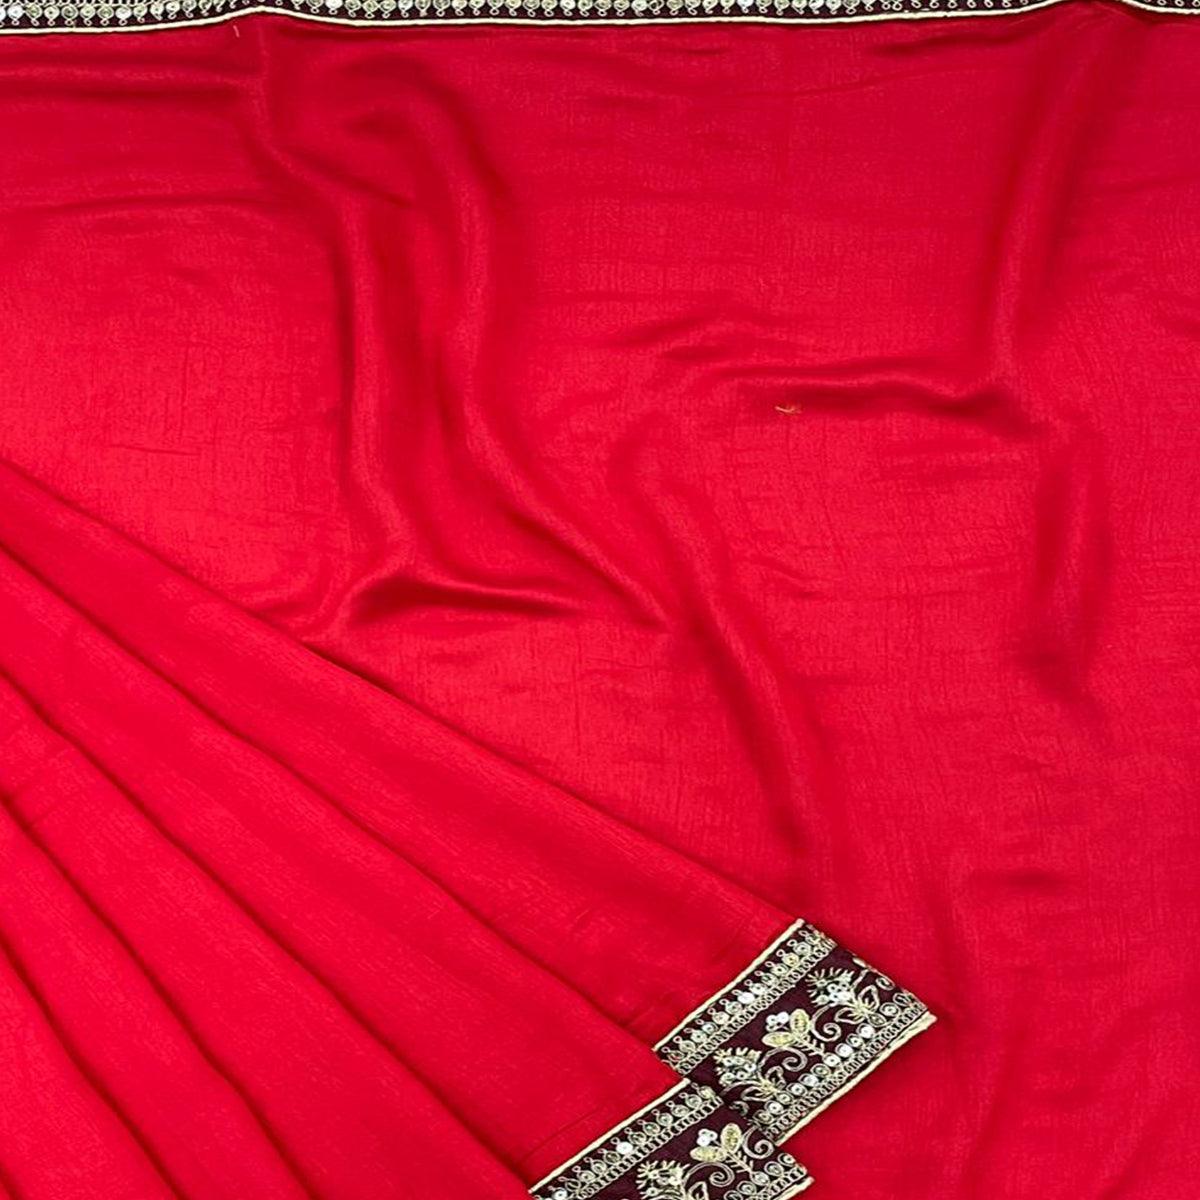 Red Partywear Sequence Embroidered Lace Silk Saree - Peachmode